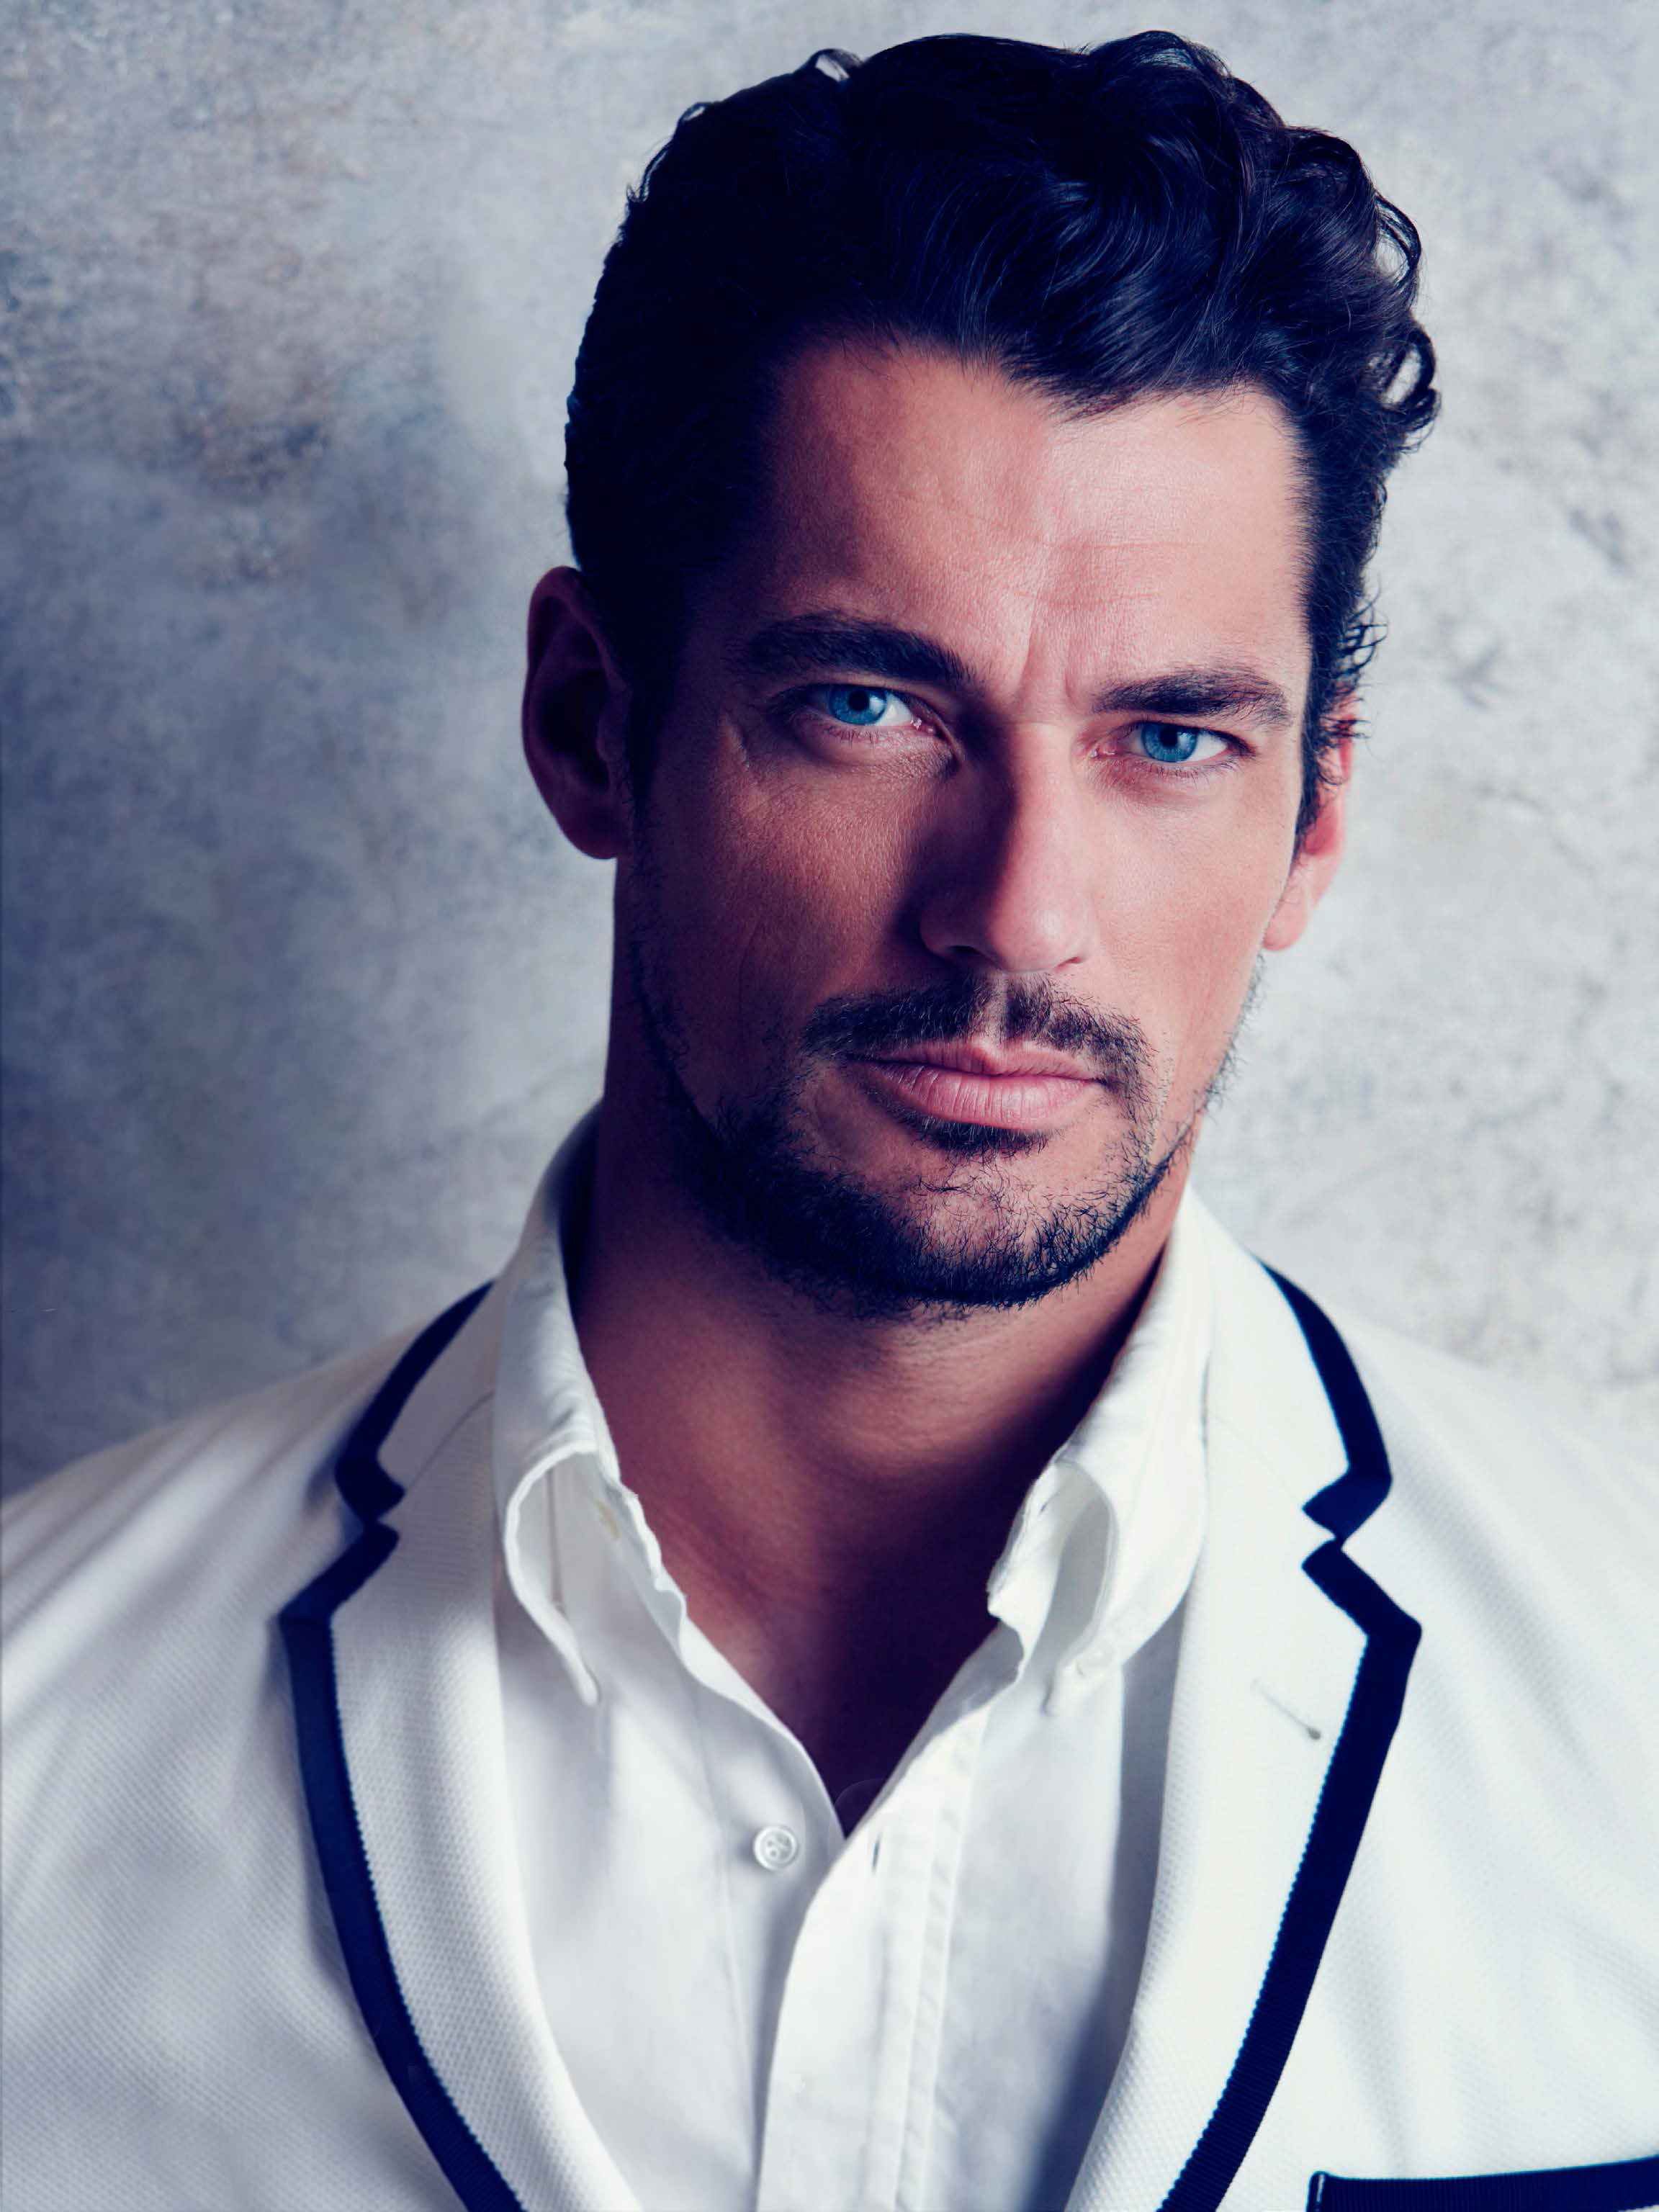 David Gandy Wallpaper Image Photos Pictures Background